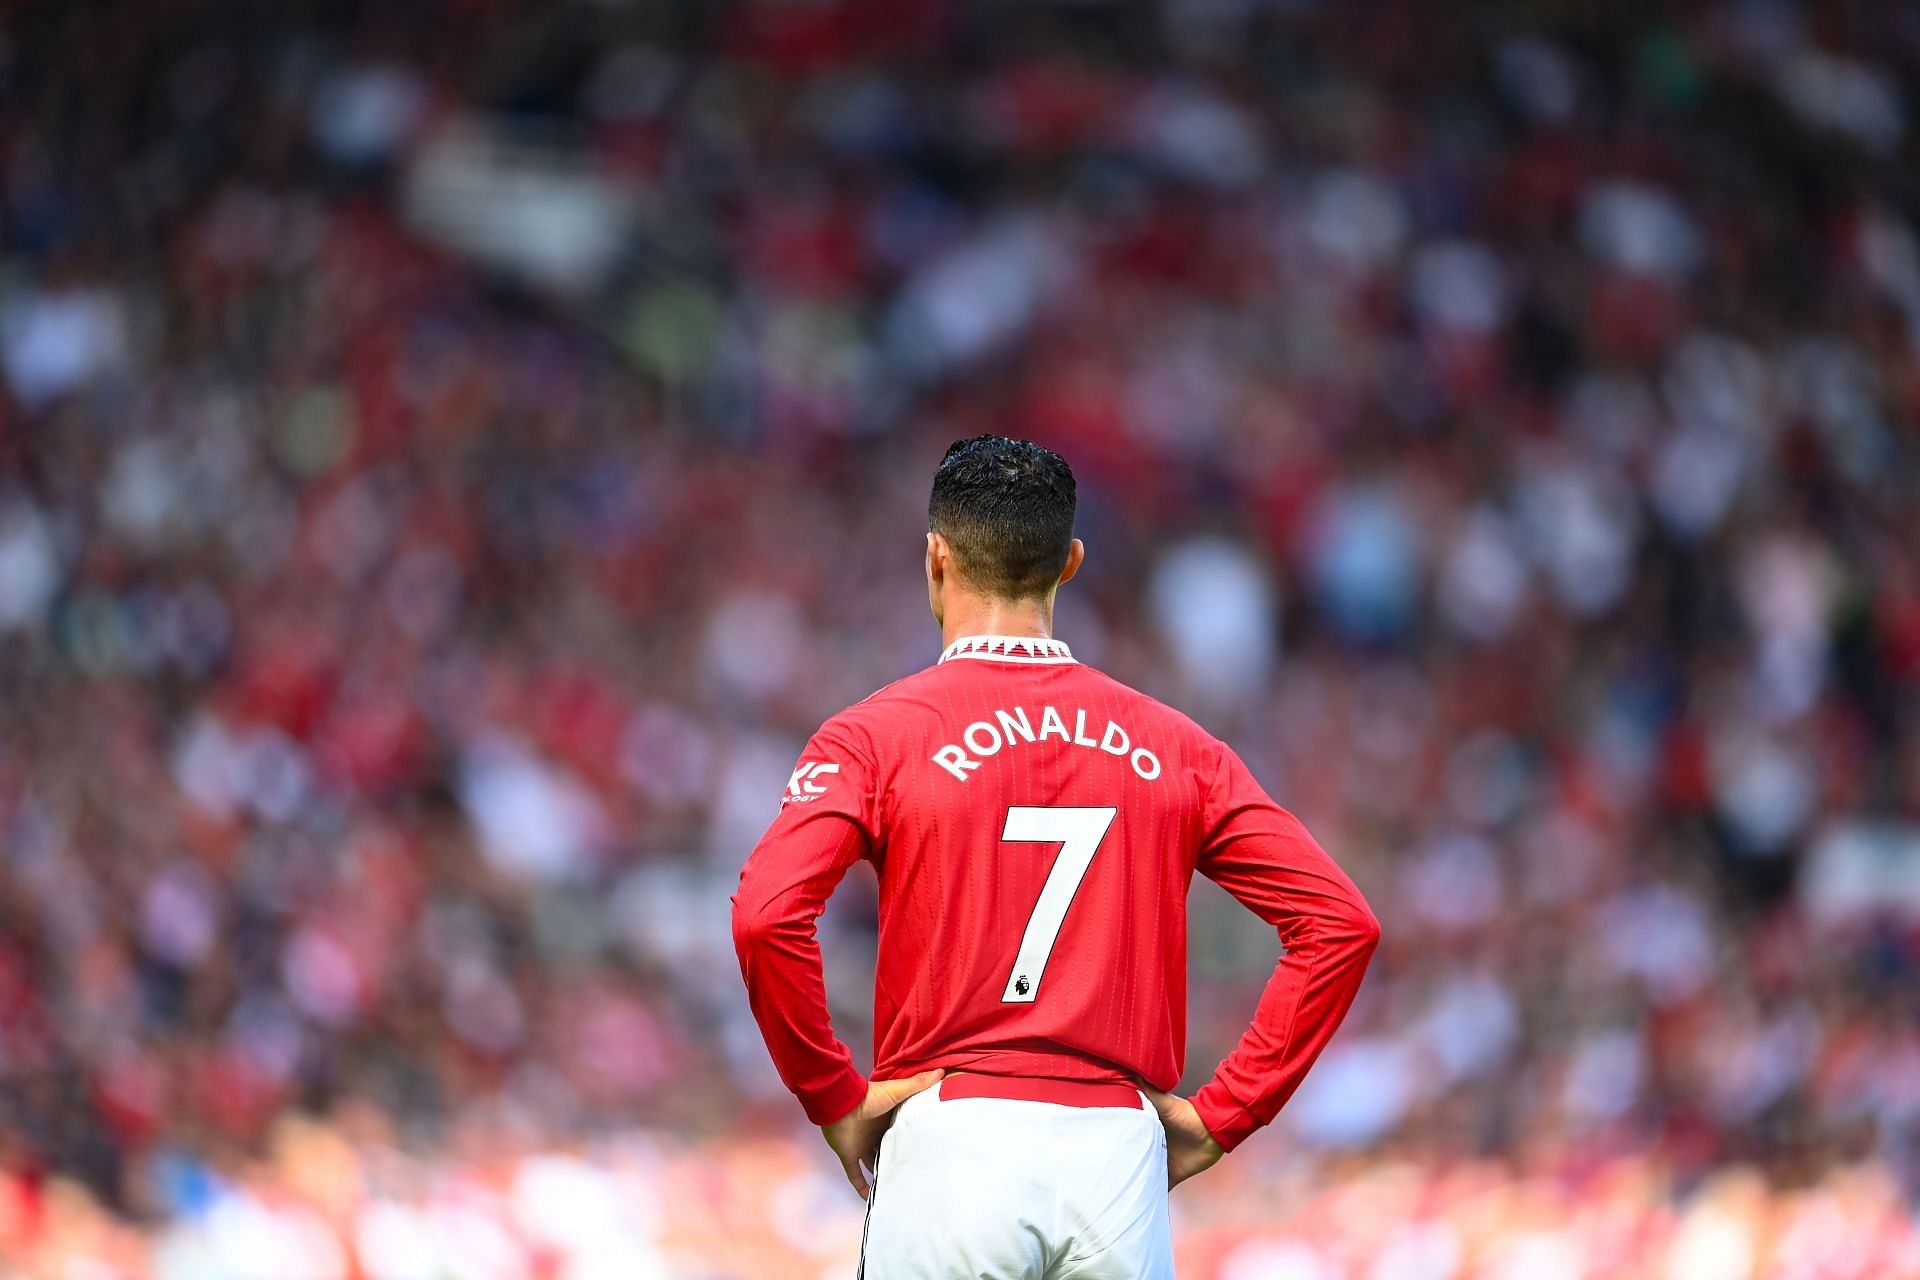 Cristiano Ronaldo is looking to script a move away from Old Trafford this summer.